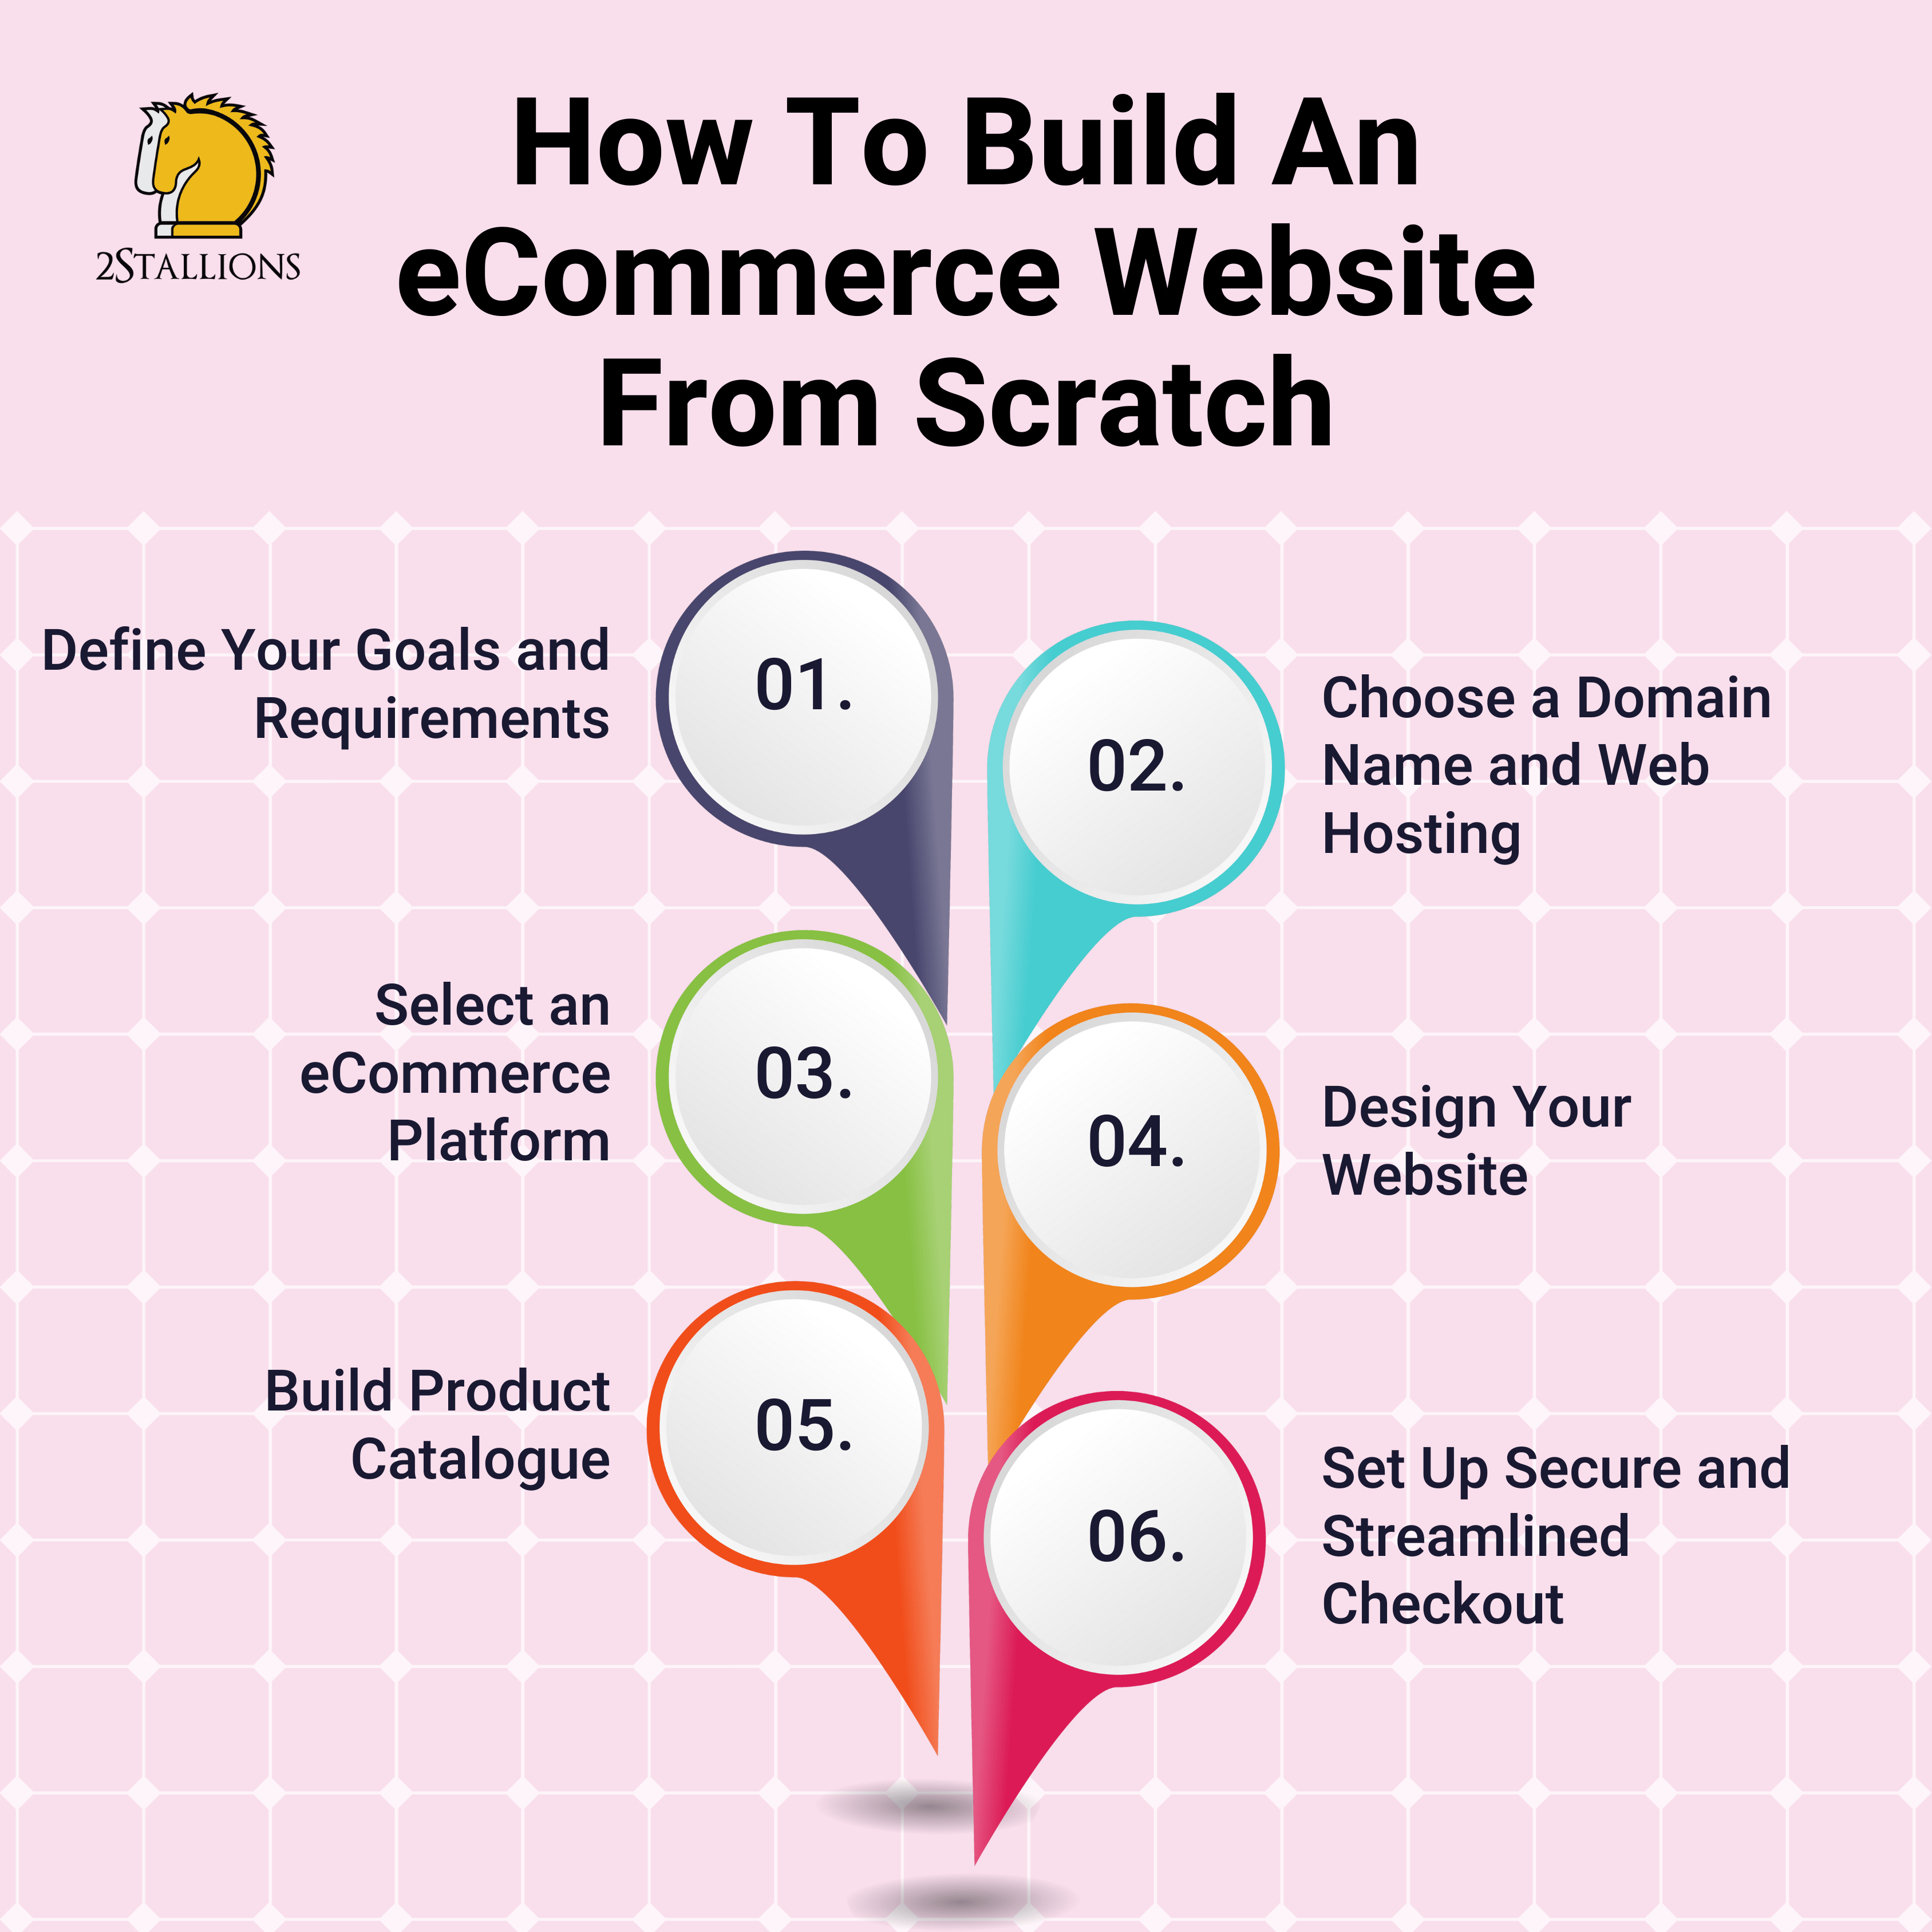 How To Build An eCommerce Website From Scratch - 1 | 2Stallions